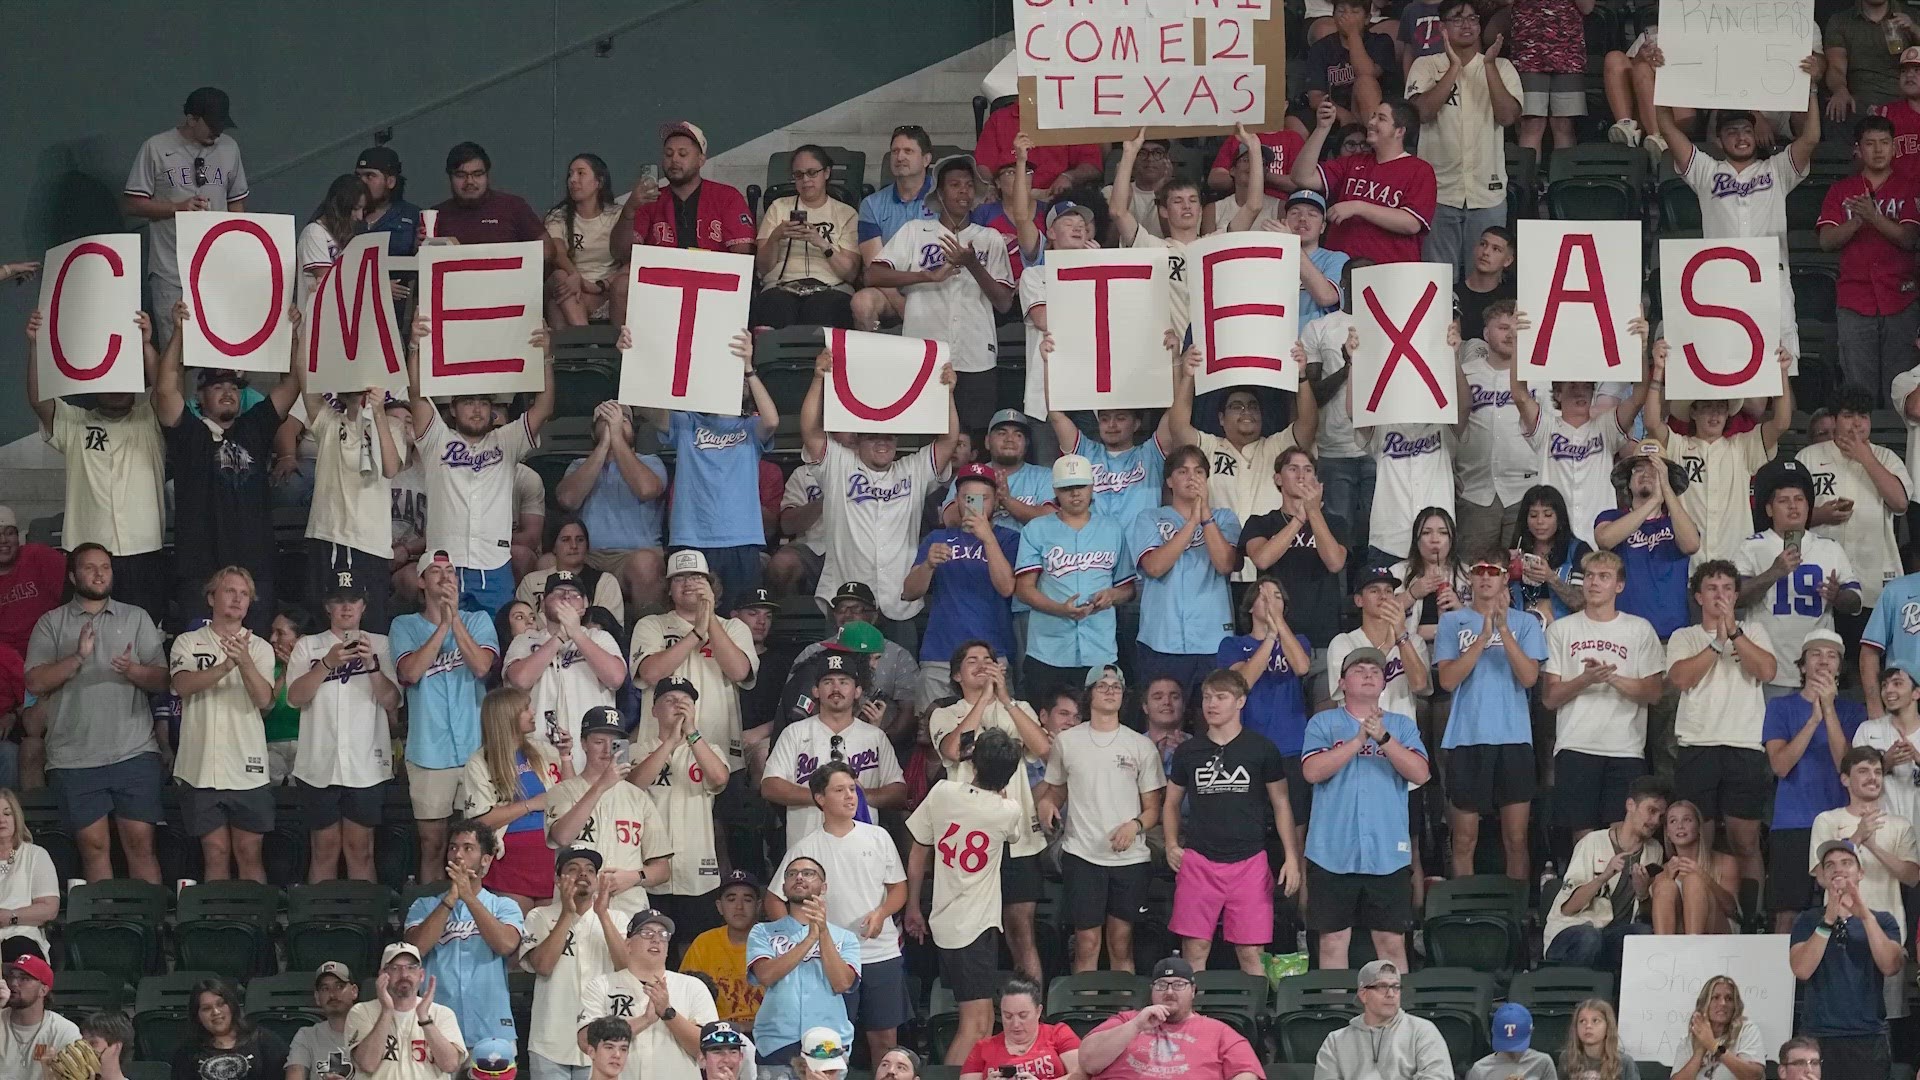 Texas Rangers fans turn centerfield section into rowdy atmosphere